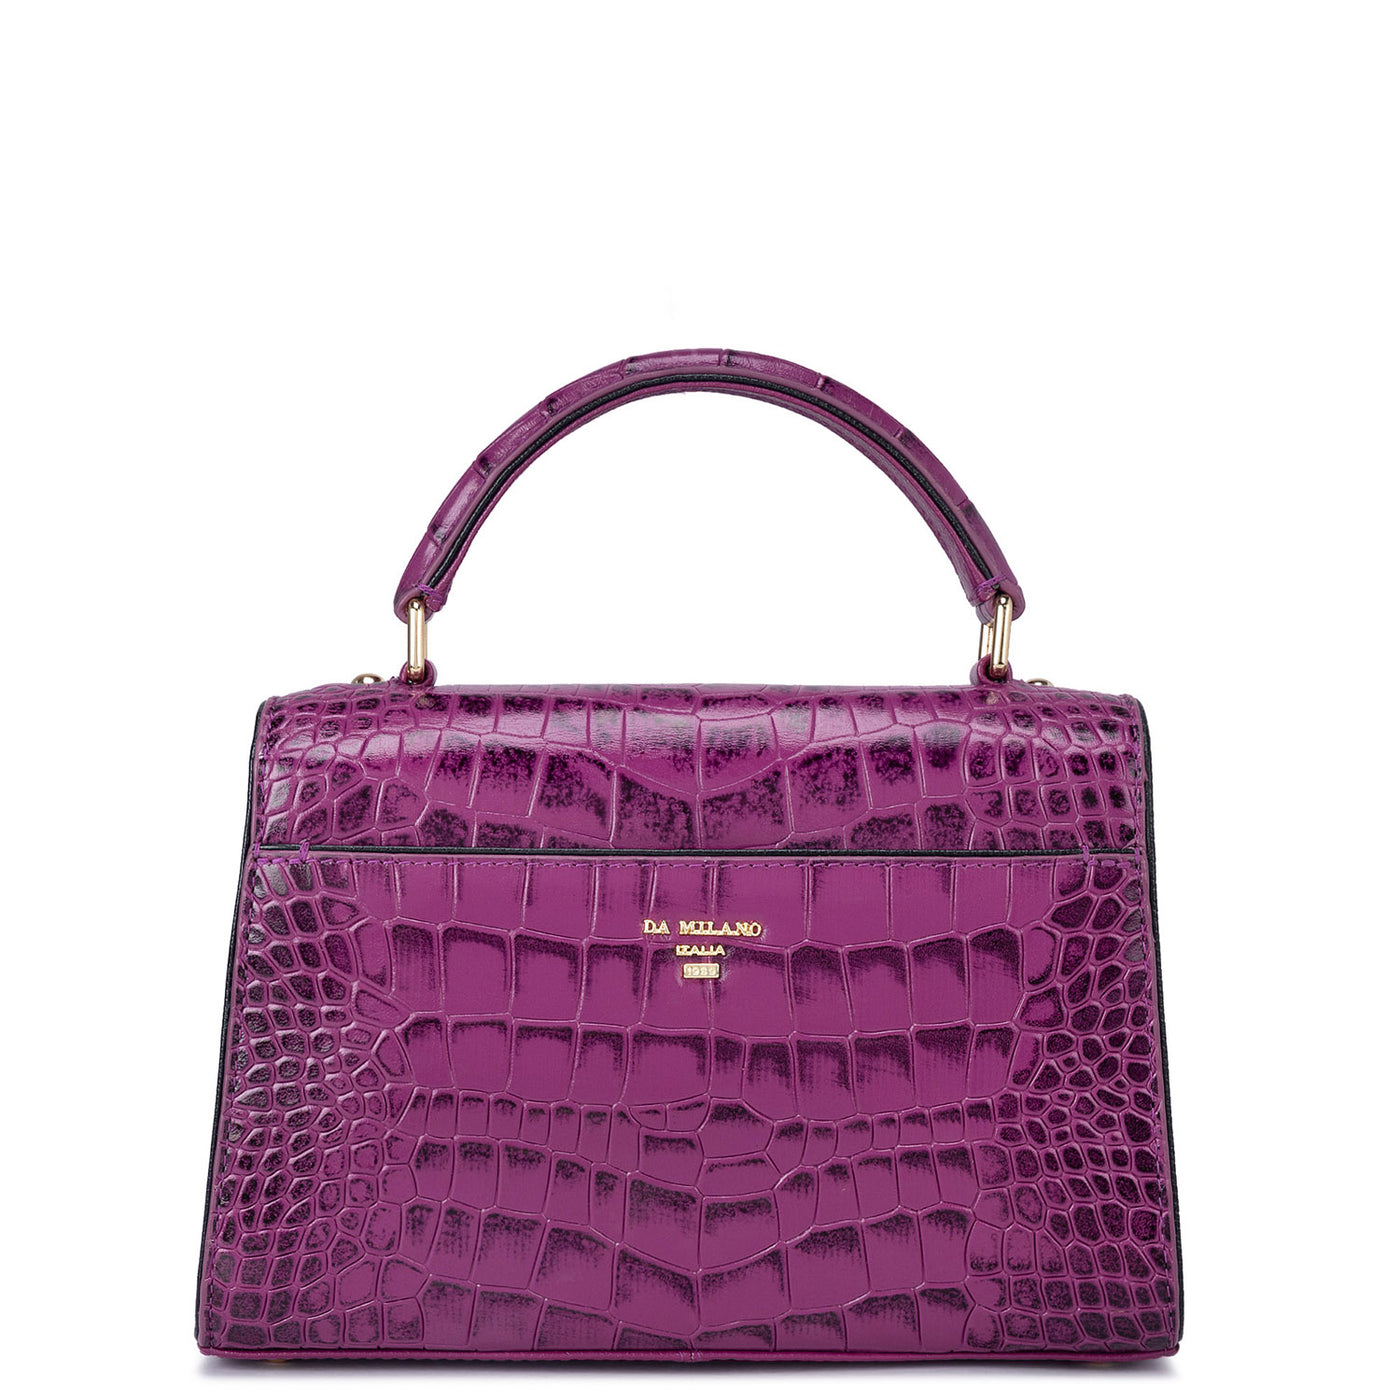 Small Croco Leather Satchel - Orchid